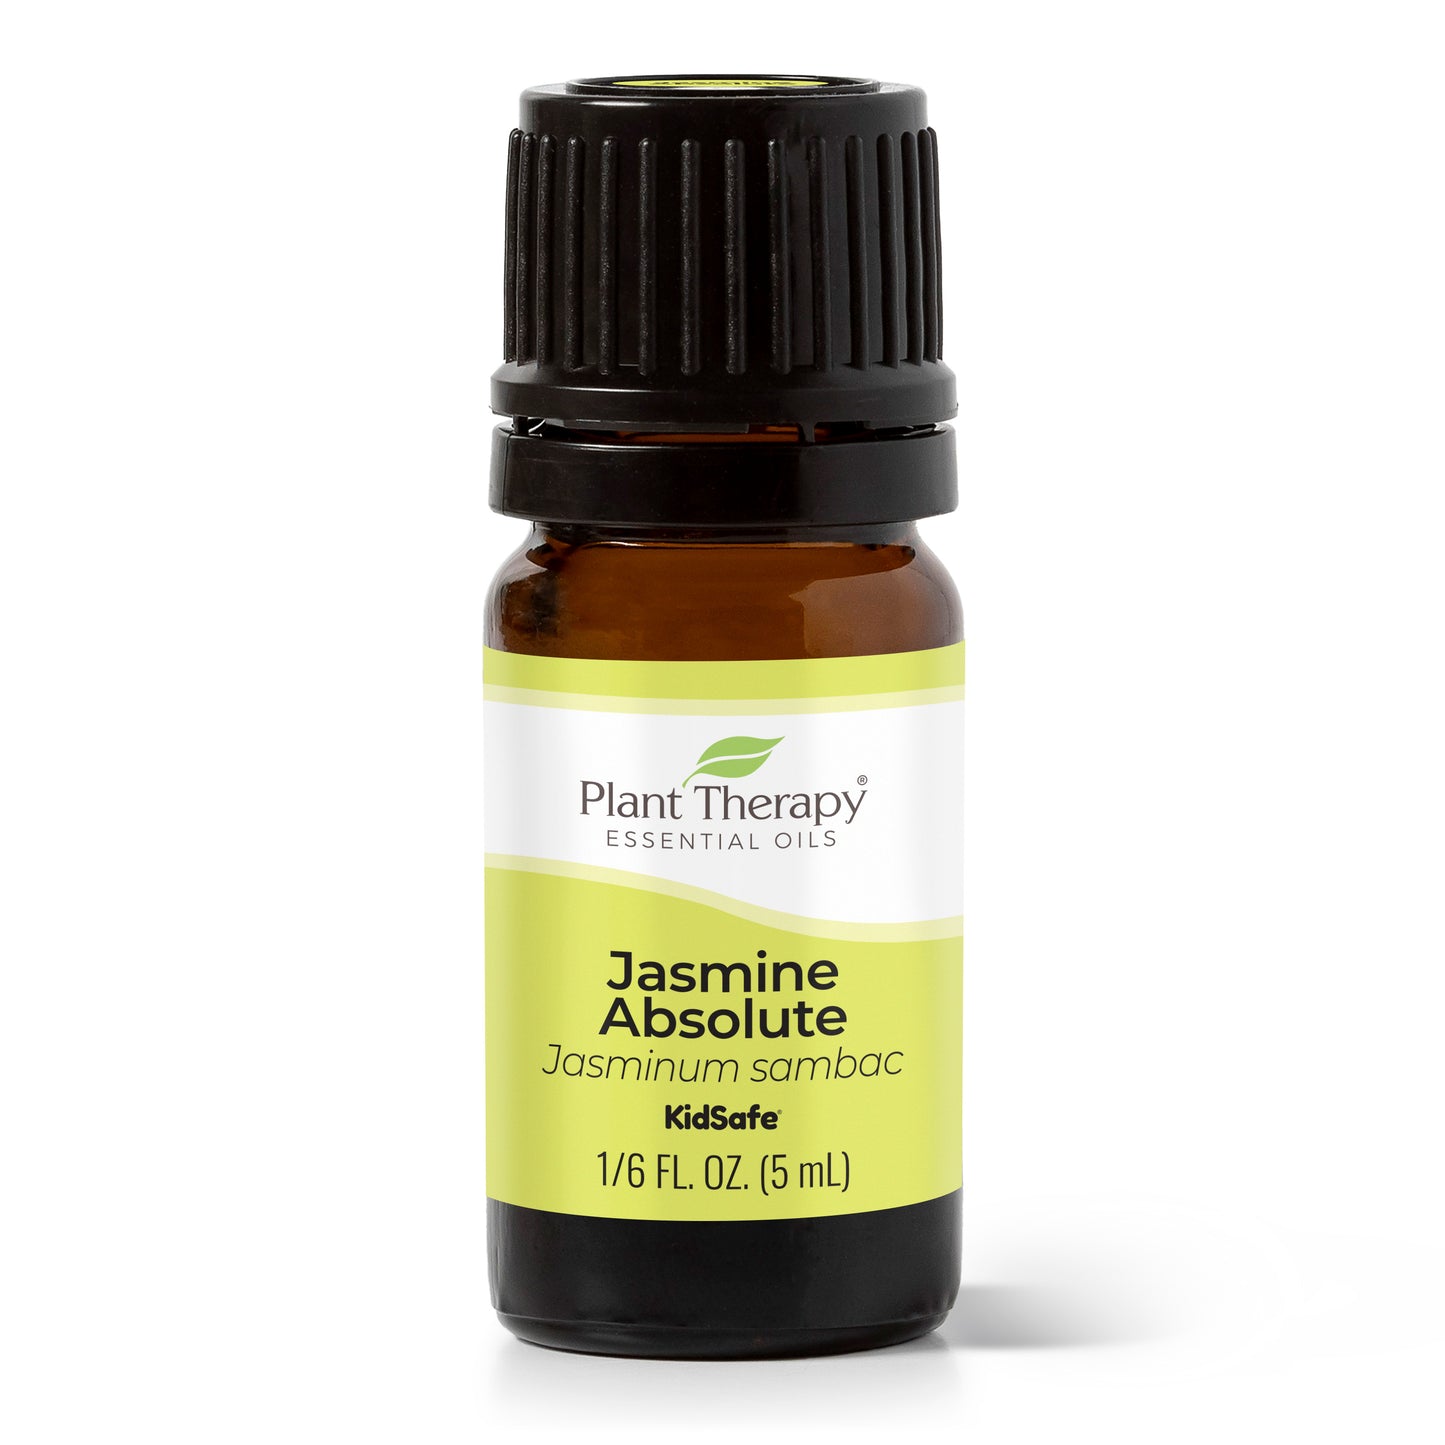 Plant Therapy Jasmine Absolute Essential Oil | 100% Pure, Undiluted, Natural Aromatherapy, Therapeutic Grade | 2.5 ml